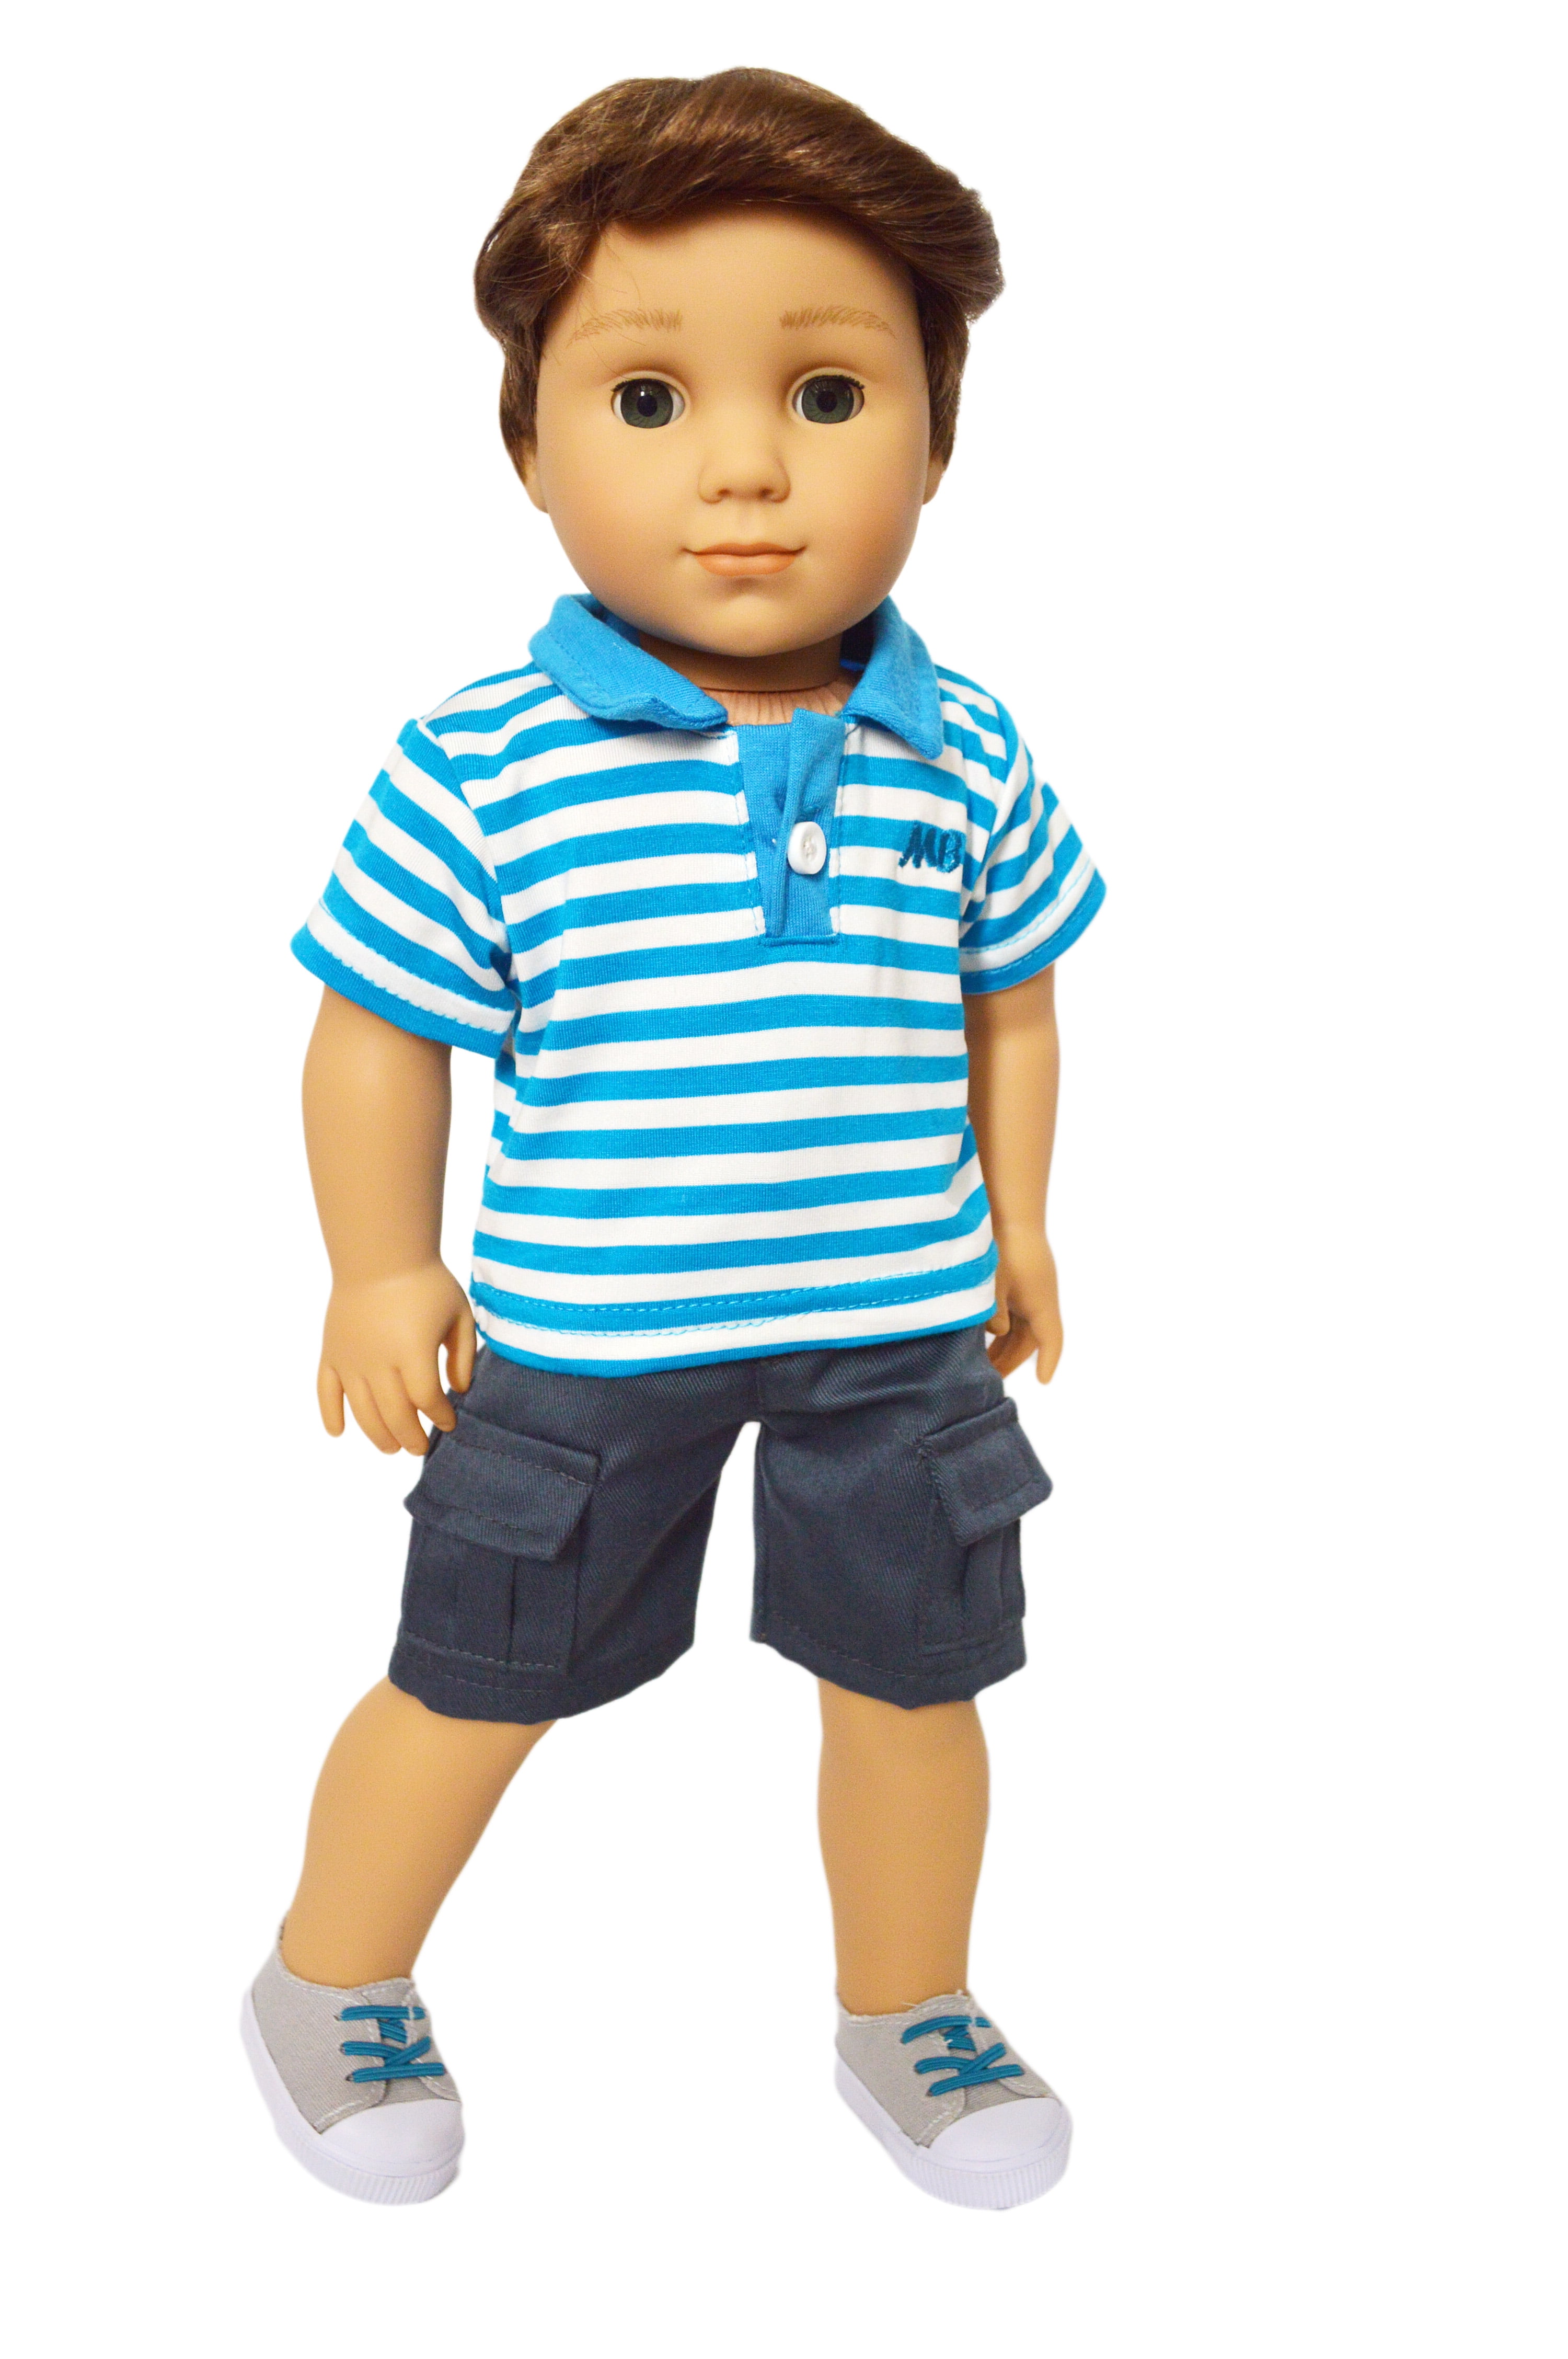 American Creations Blue Shorts Outfit Compatible With 18 Inch American Girl And My Life As Dolls